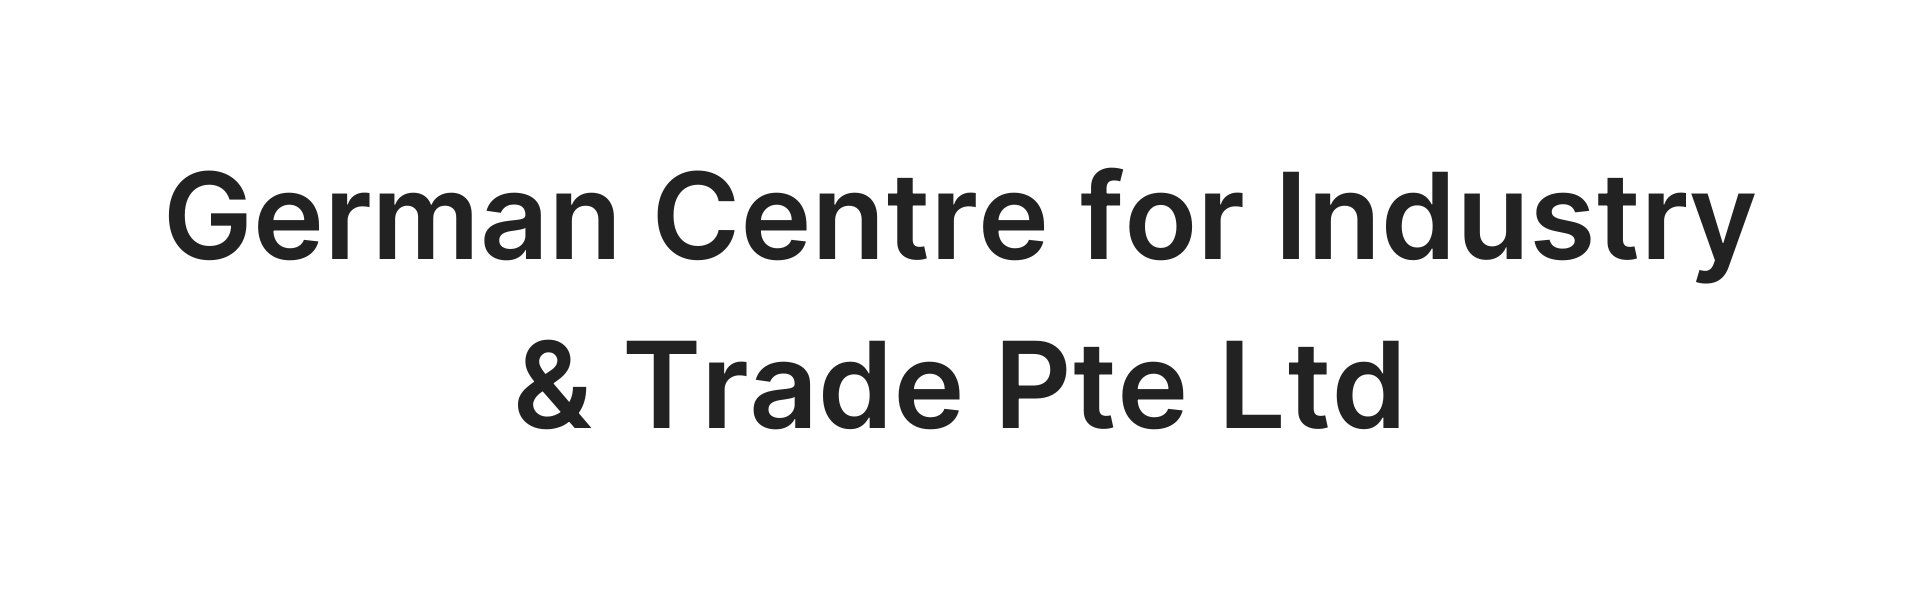 German Centre for Industry & Trade Pte Ltd